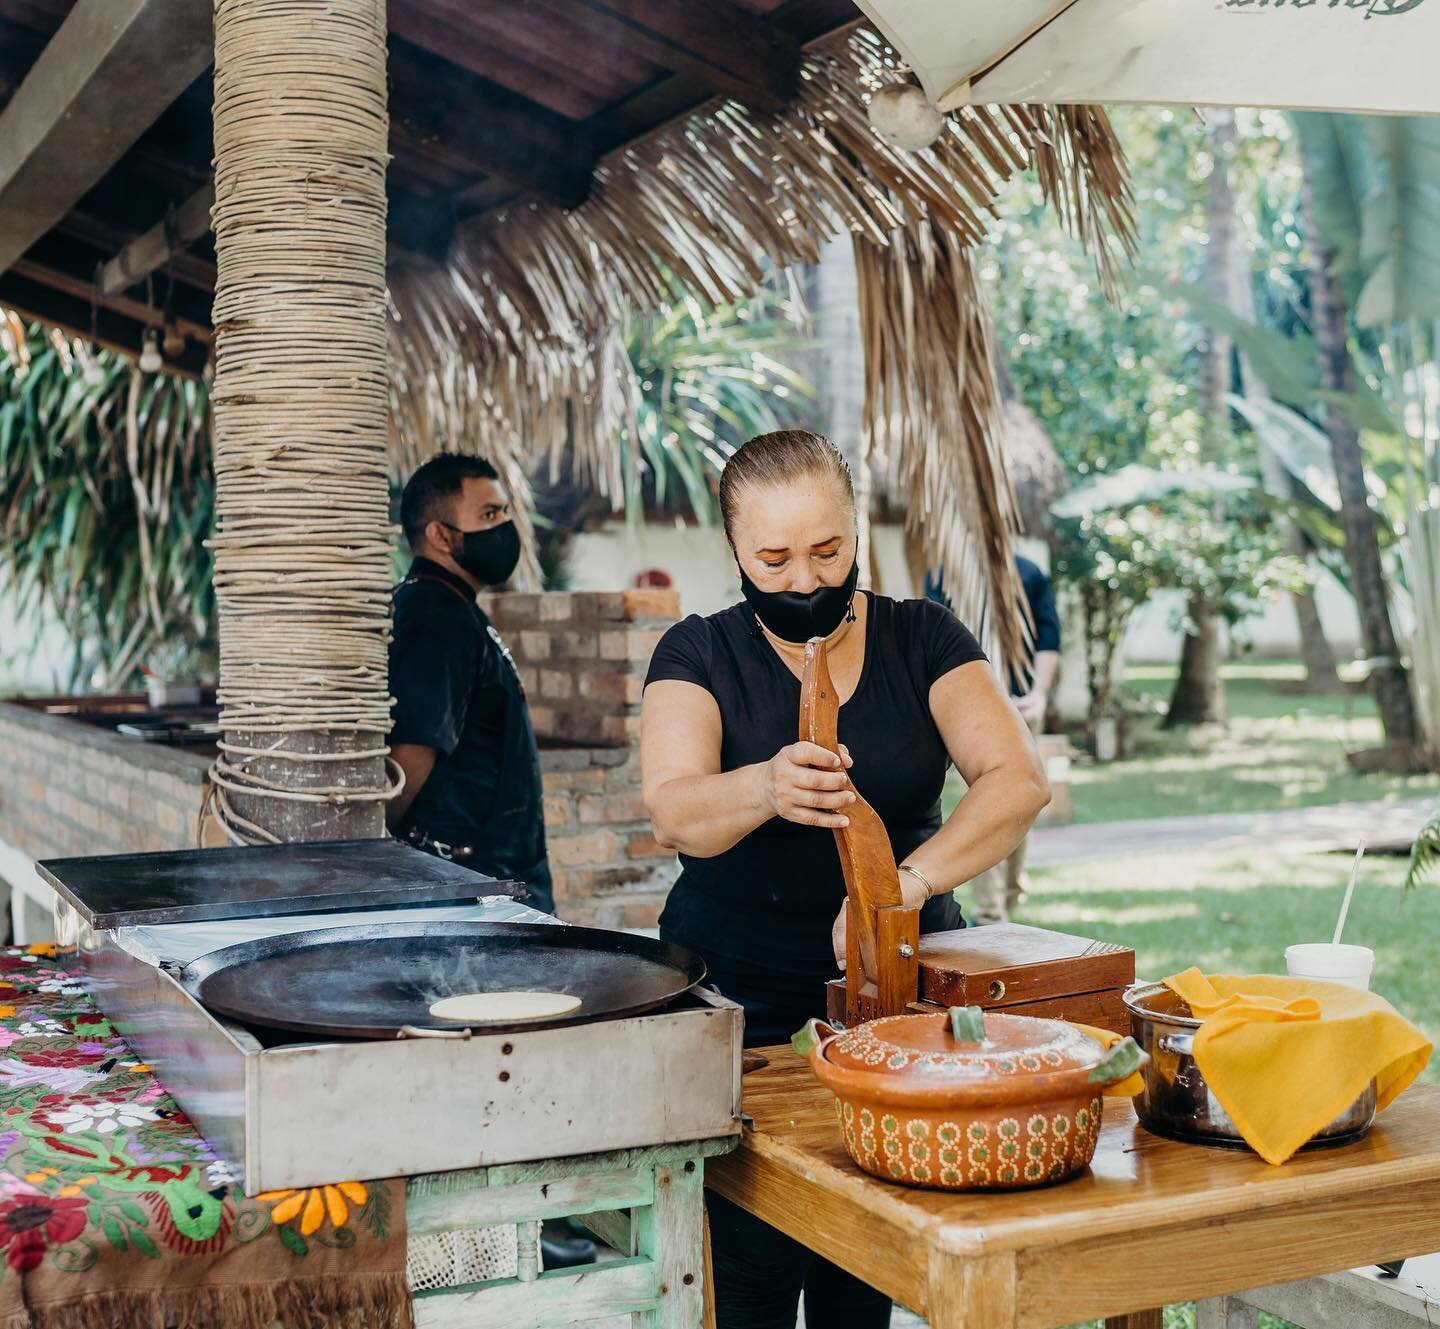 Hand made tortillas. Delicious bites from the grill. Fresh ingredients sourced locally. Passionate humans creating your food. Happy 🤍